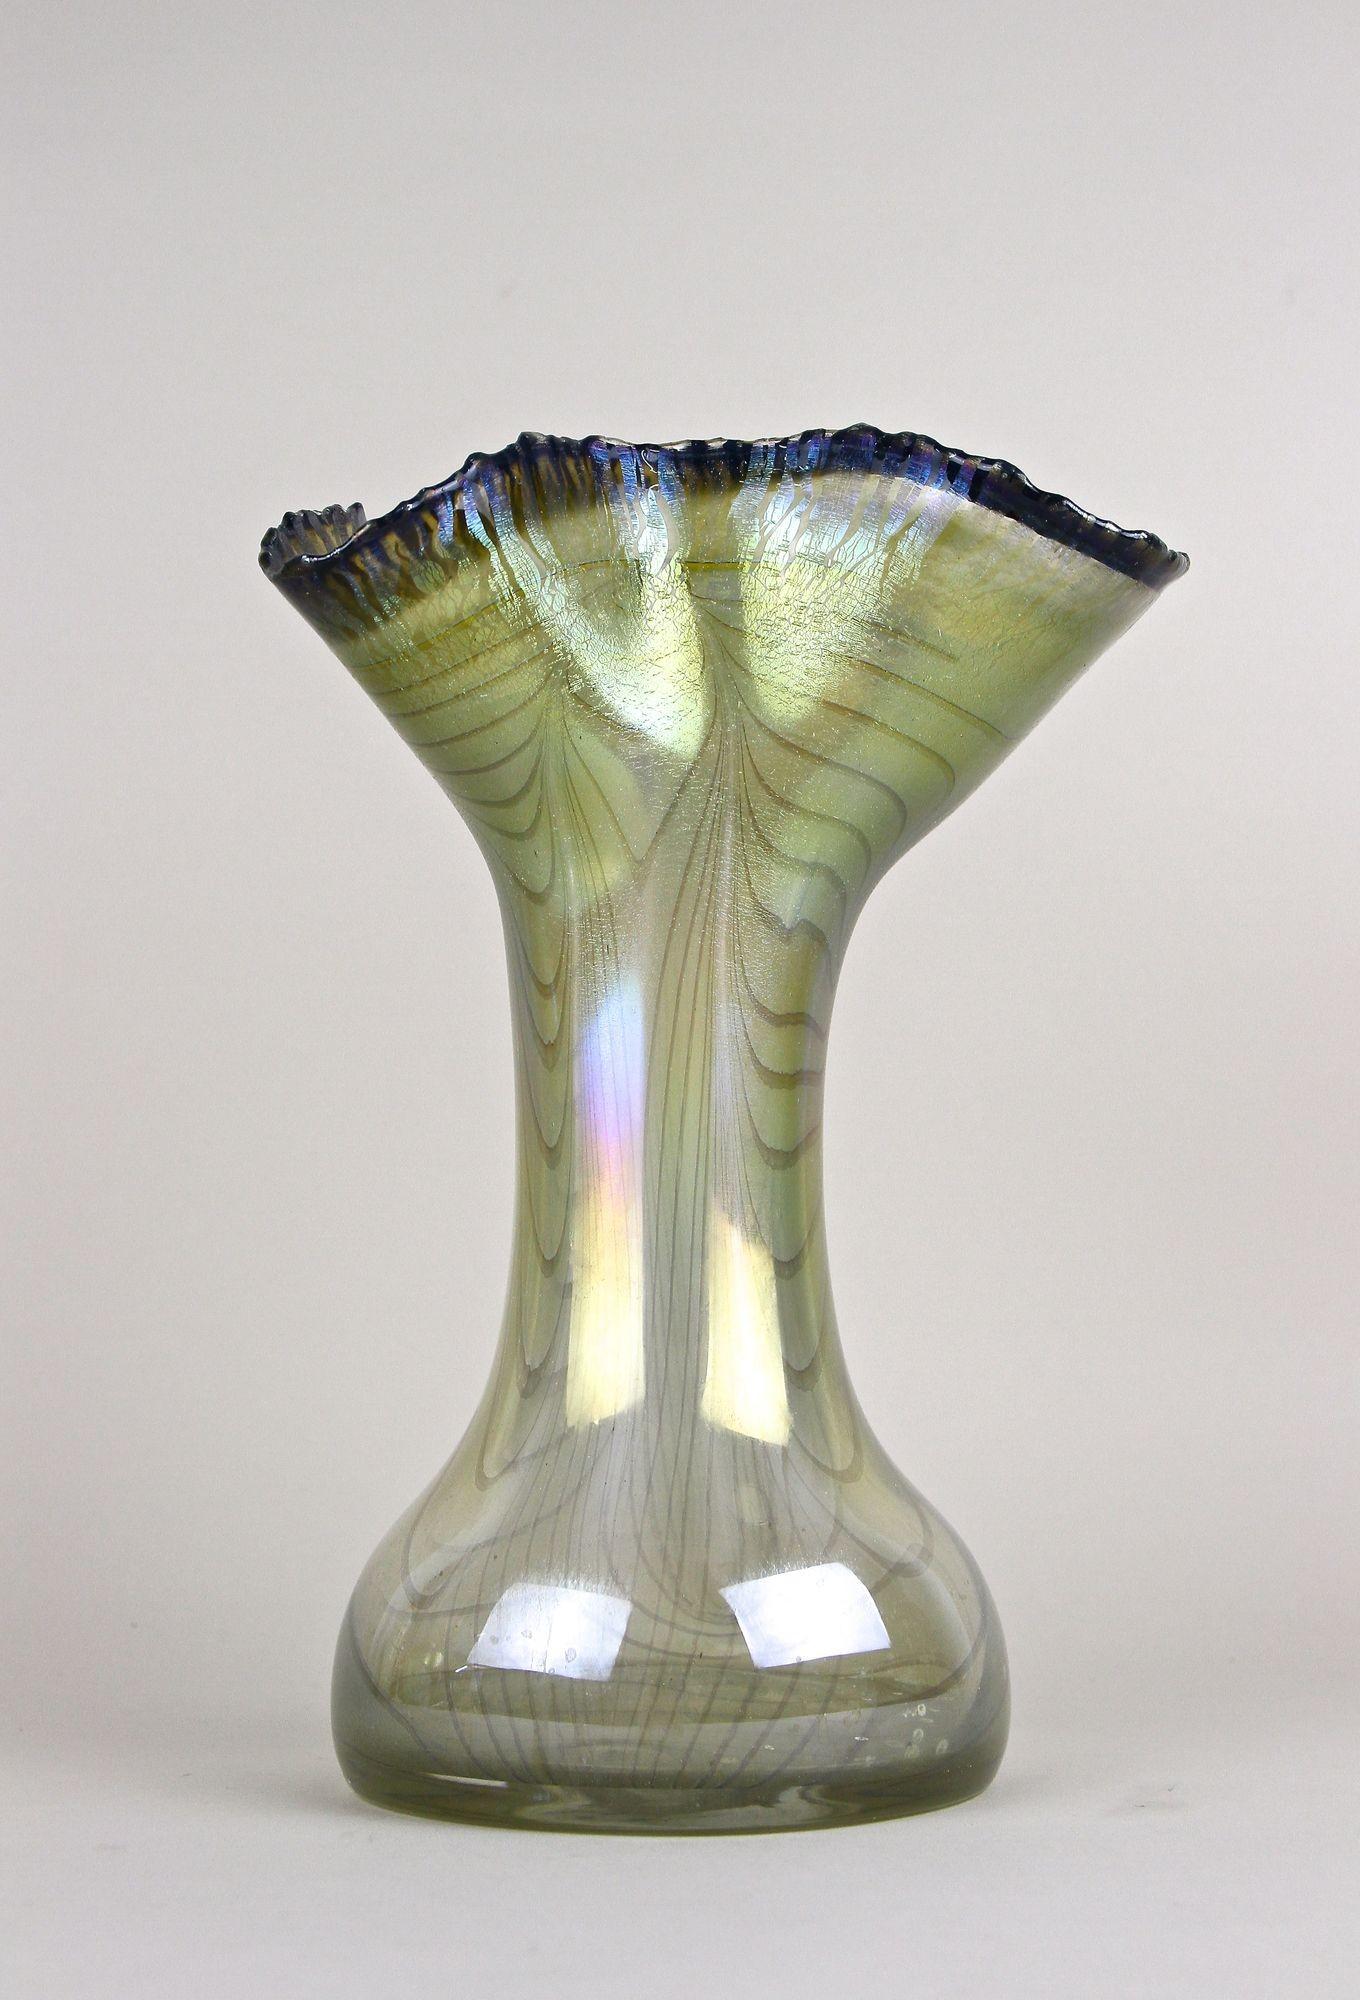 20th Century Iridescent Glass Vase by E. Eisch - Signed, Germany 1982 For Sale 13